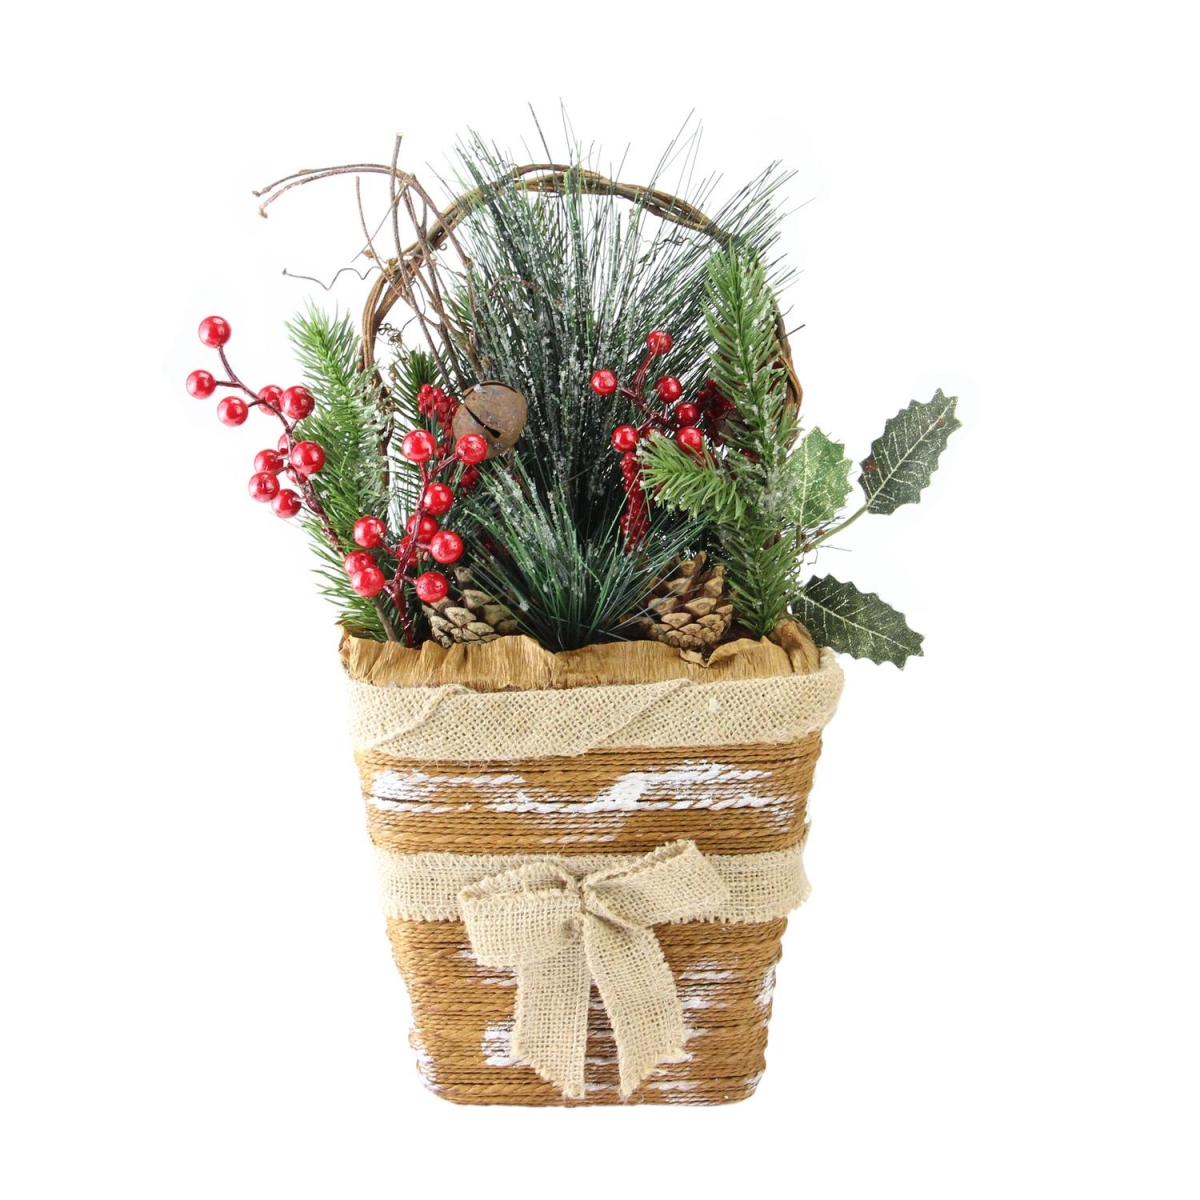 32634961 13.5 In. Artificial Frosted Pine Needles & Pine Cones Hanging Christmas Basket Decoration